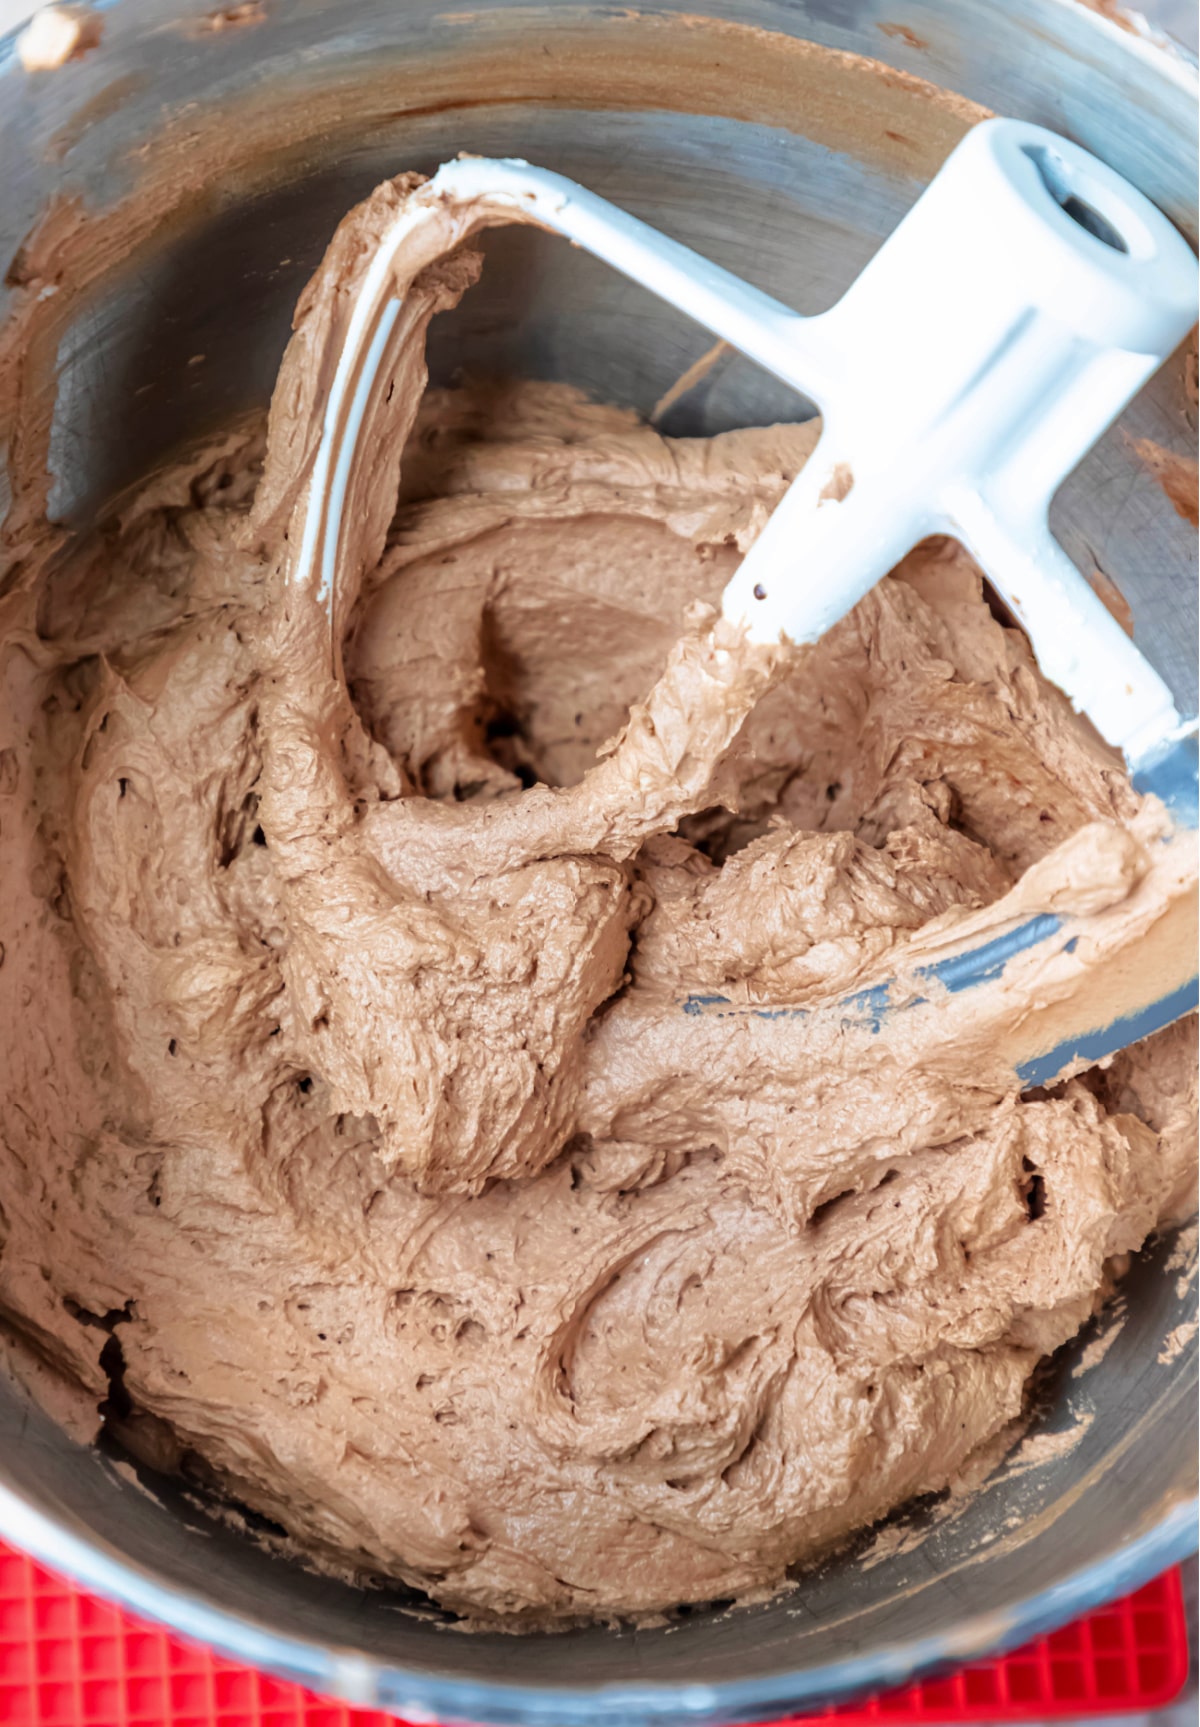 Paddle attachment in a bowl of chocolate buttercream frosting